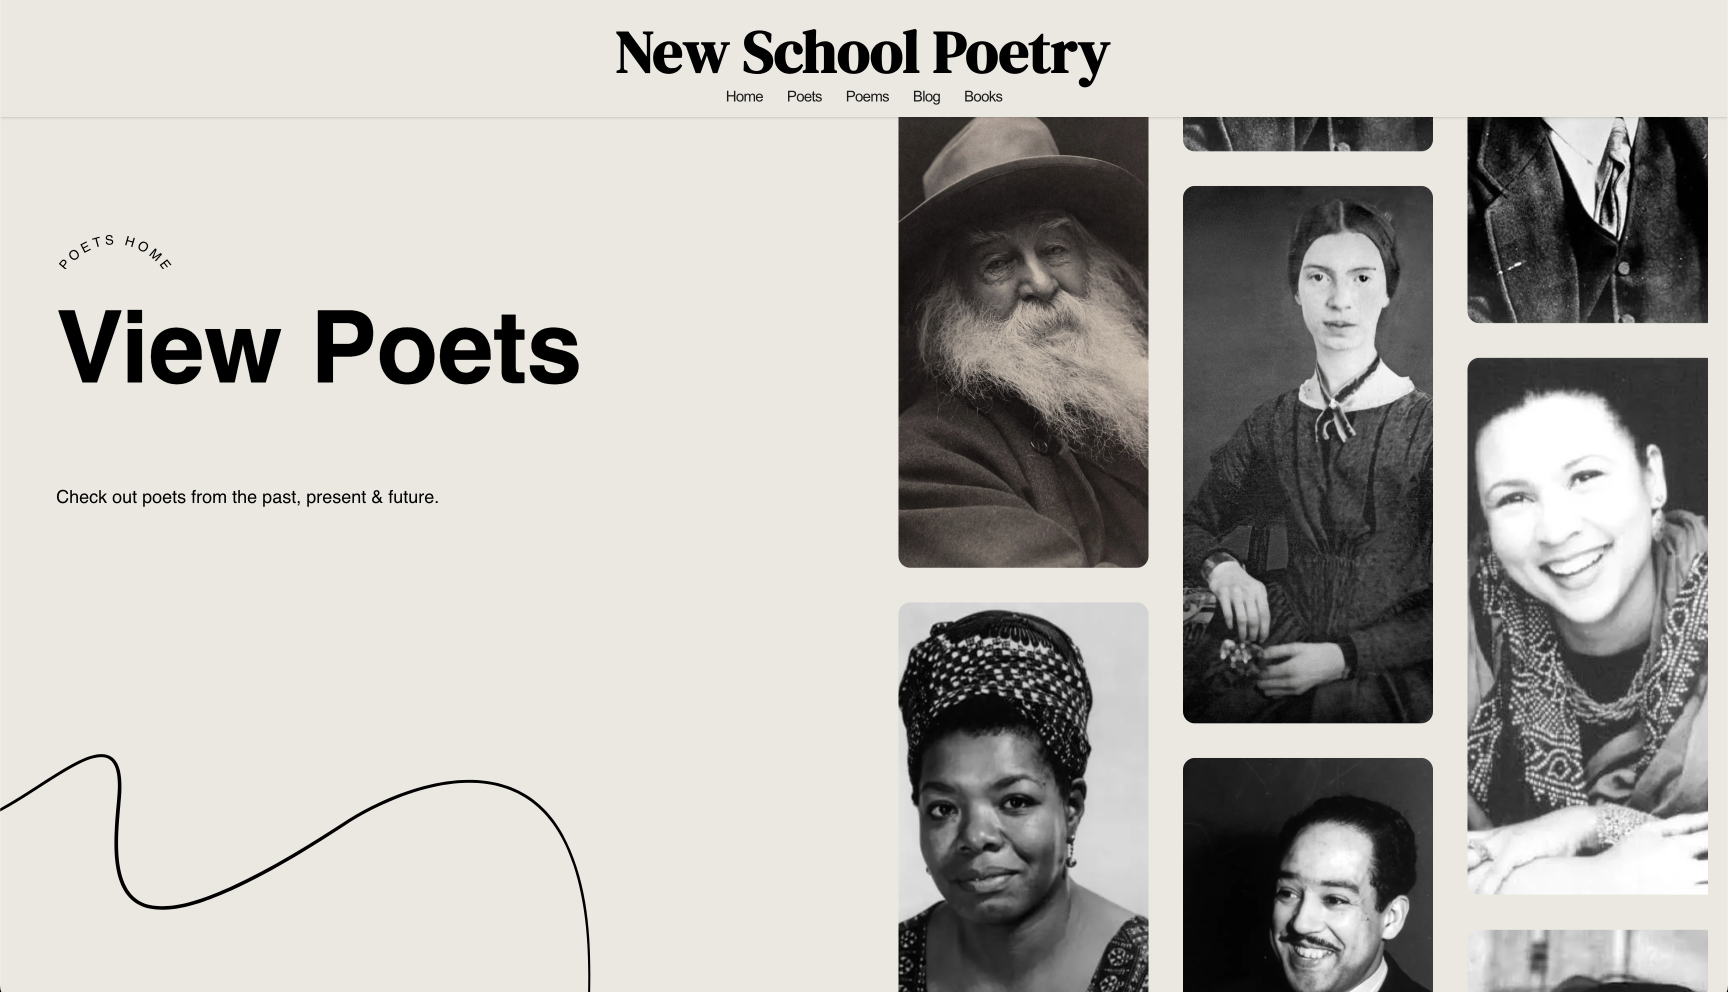 Screenshot of the New SchooI Poetry projects home page